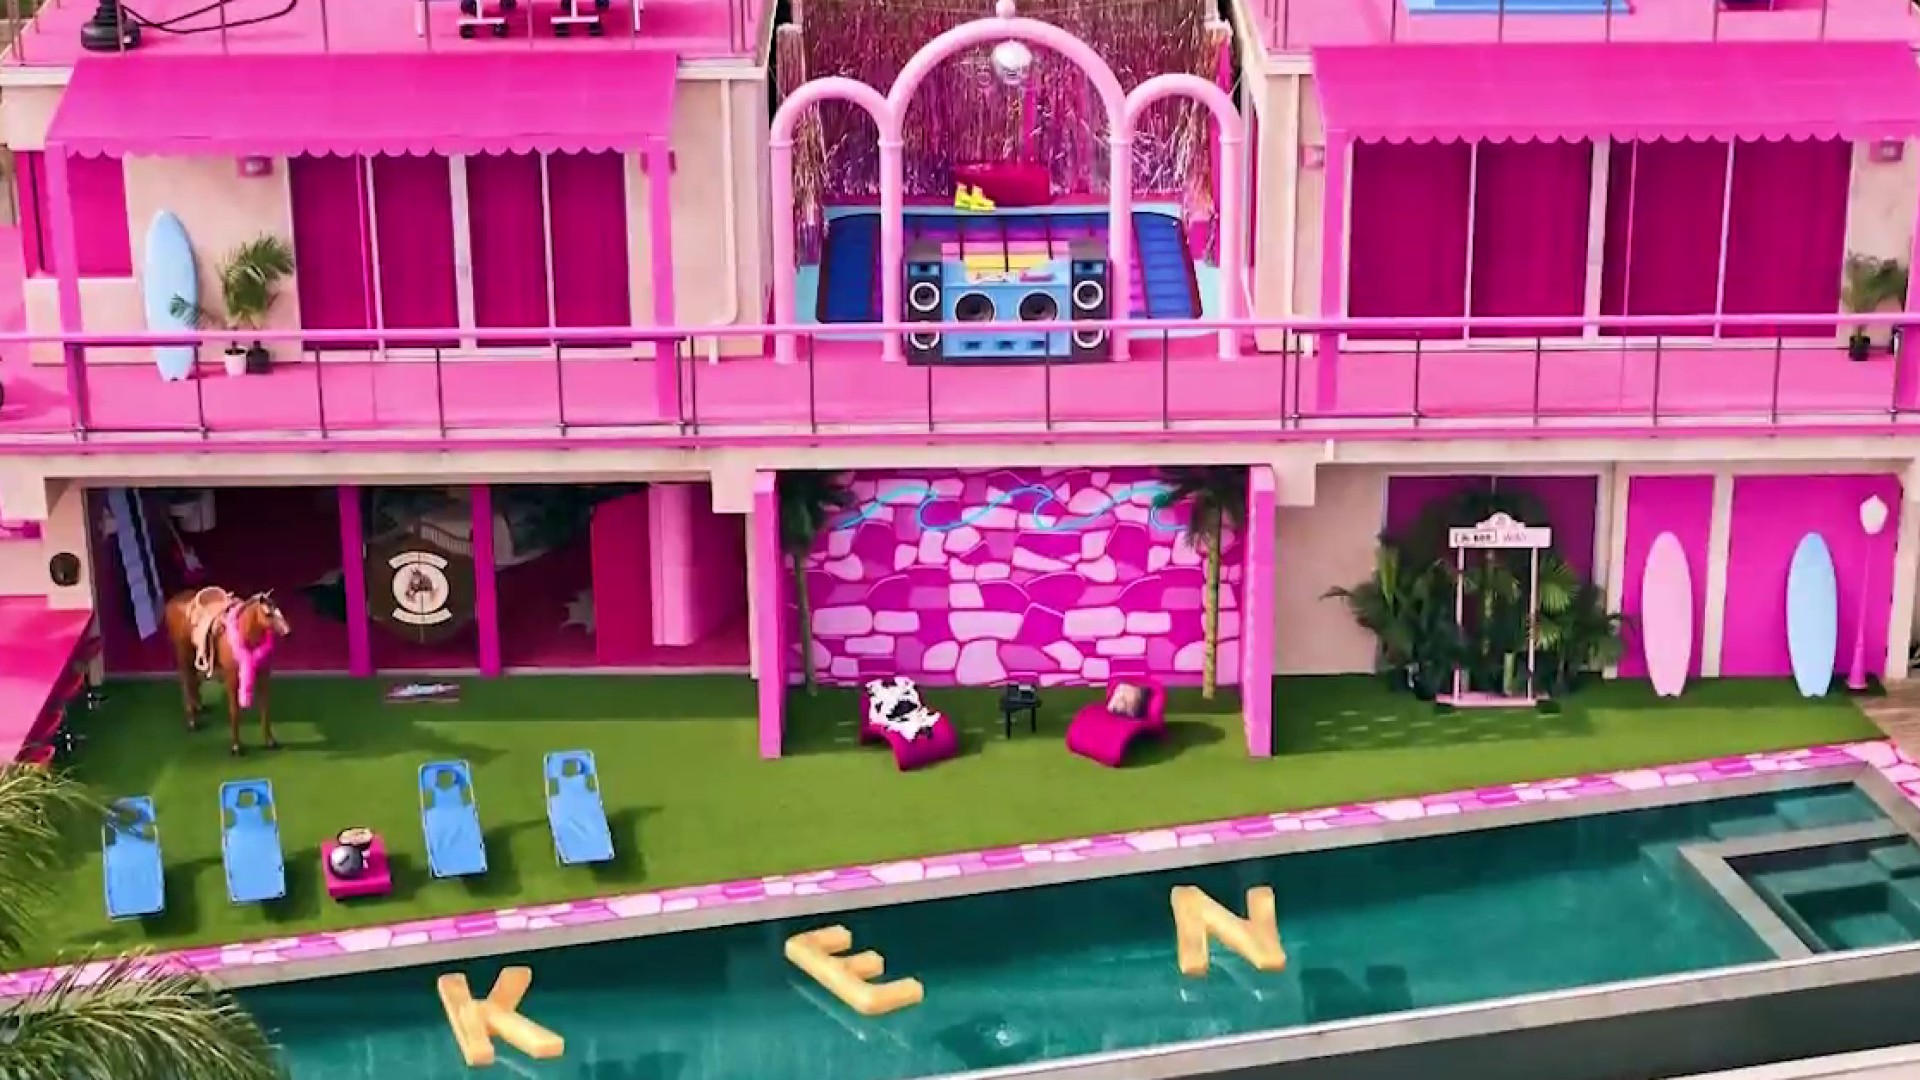 Barbie's Dreamhouse available to rent on Airbnb in Malibu - CBS Los Angeles